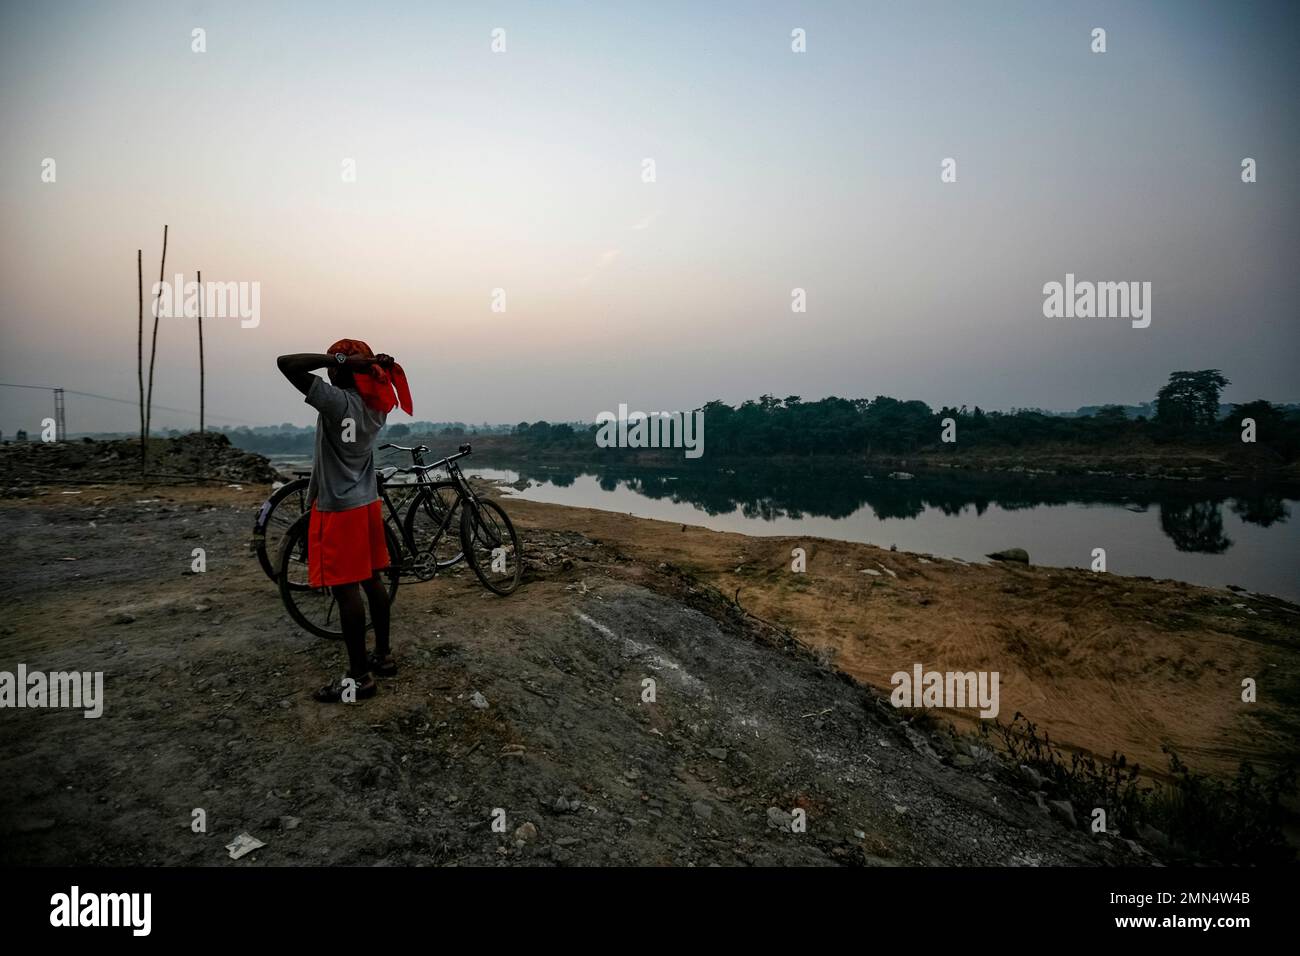 A construction worker, tying headscarf in the cold months of winters in India, with his Cycle by the River Subarnarekha in Jamshedpur. Stock Photo